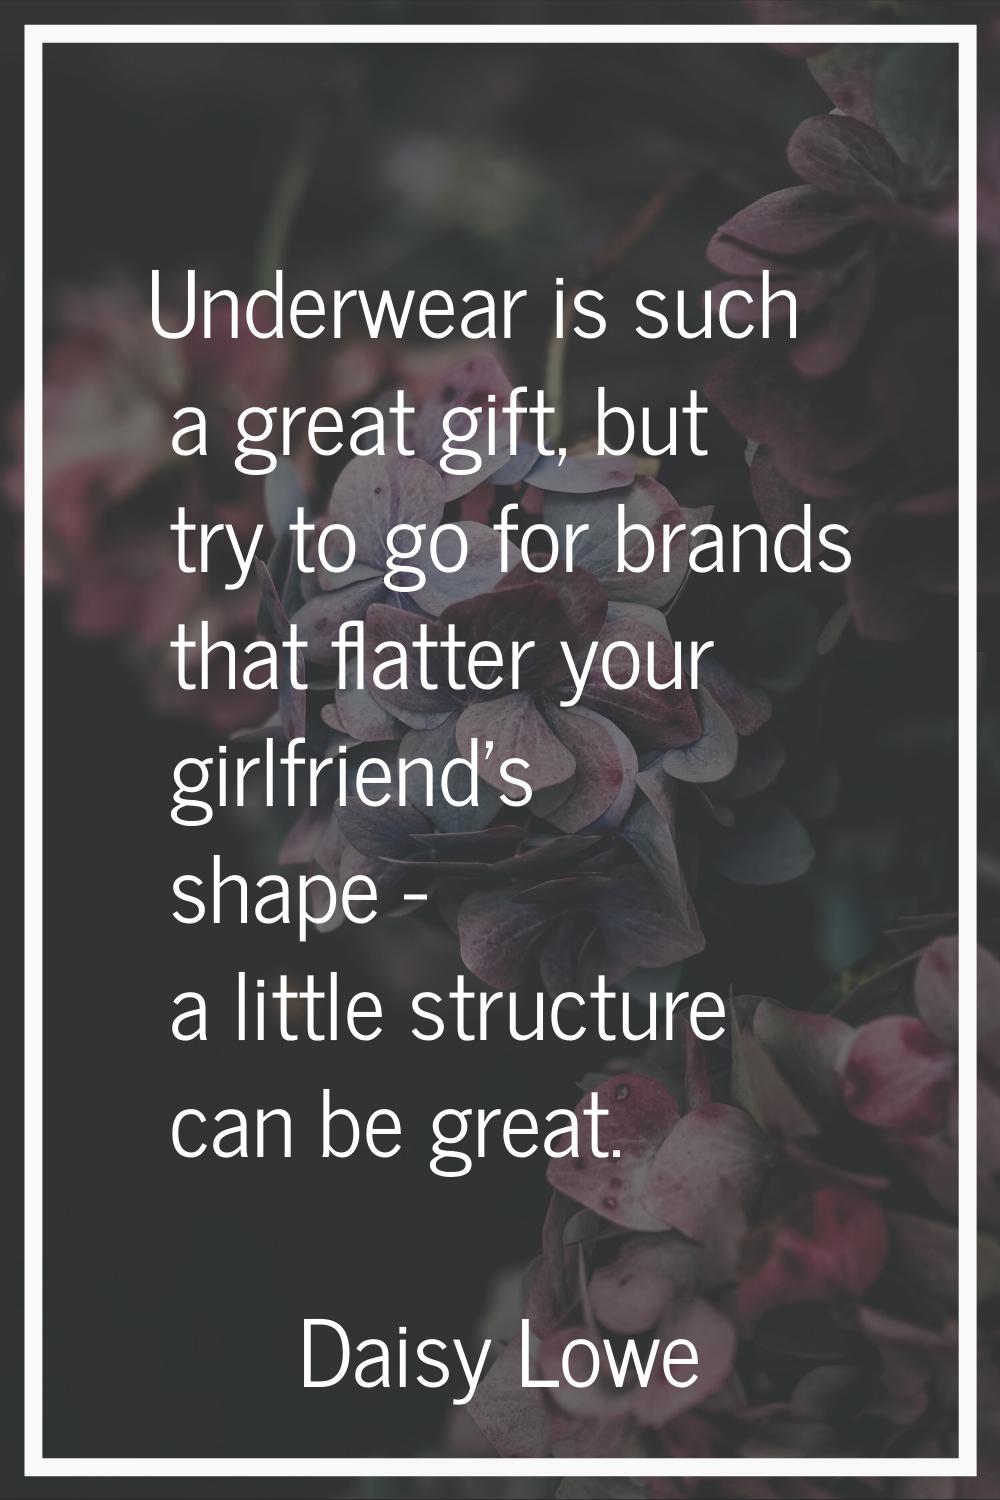 Underwear is such a great gift, but try to go for brands that flatter your girlfriend's shape - a l